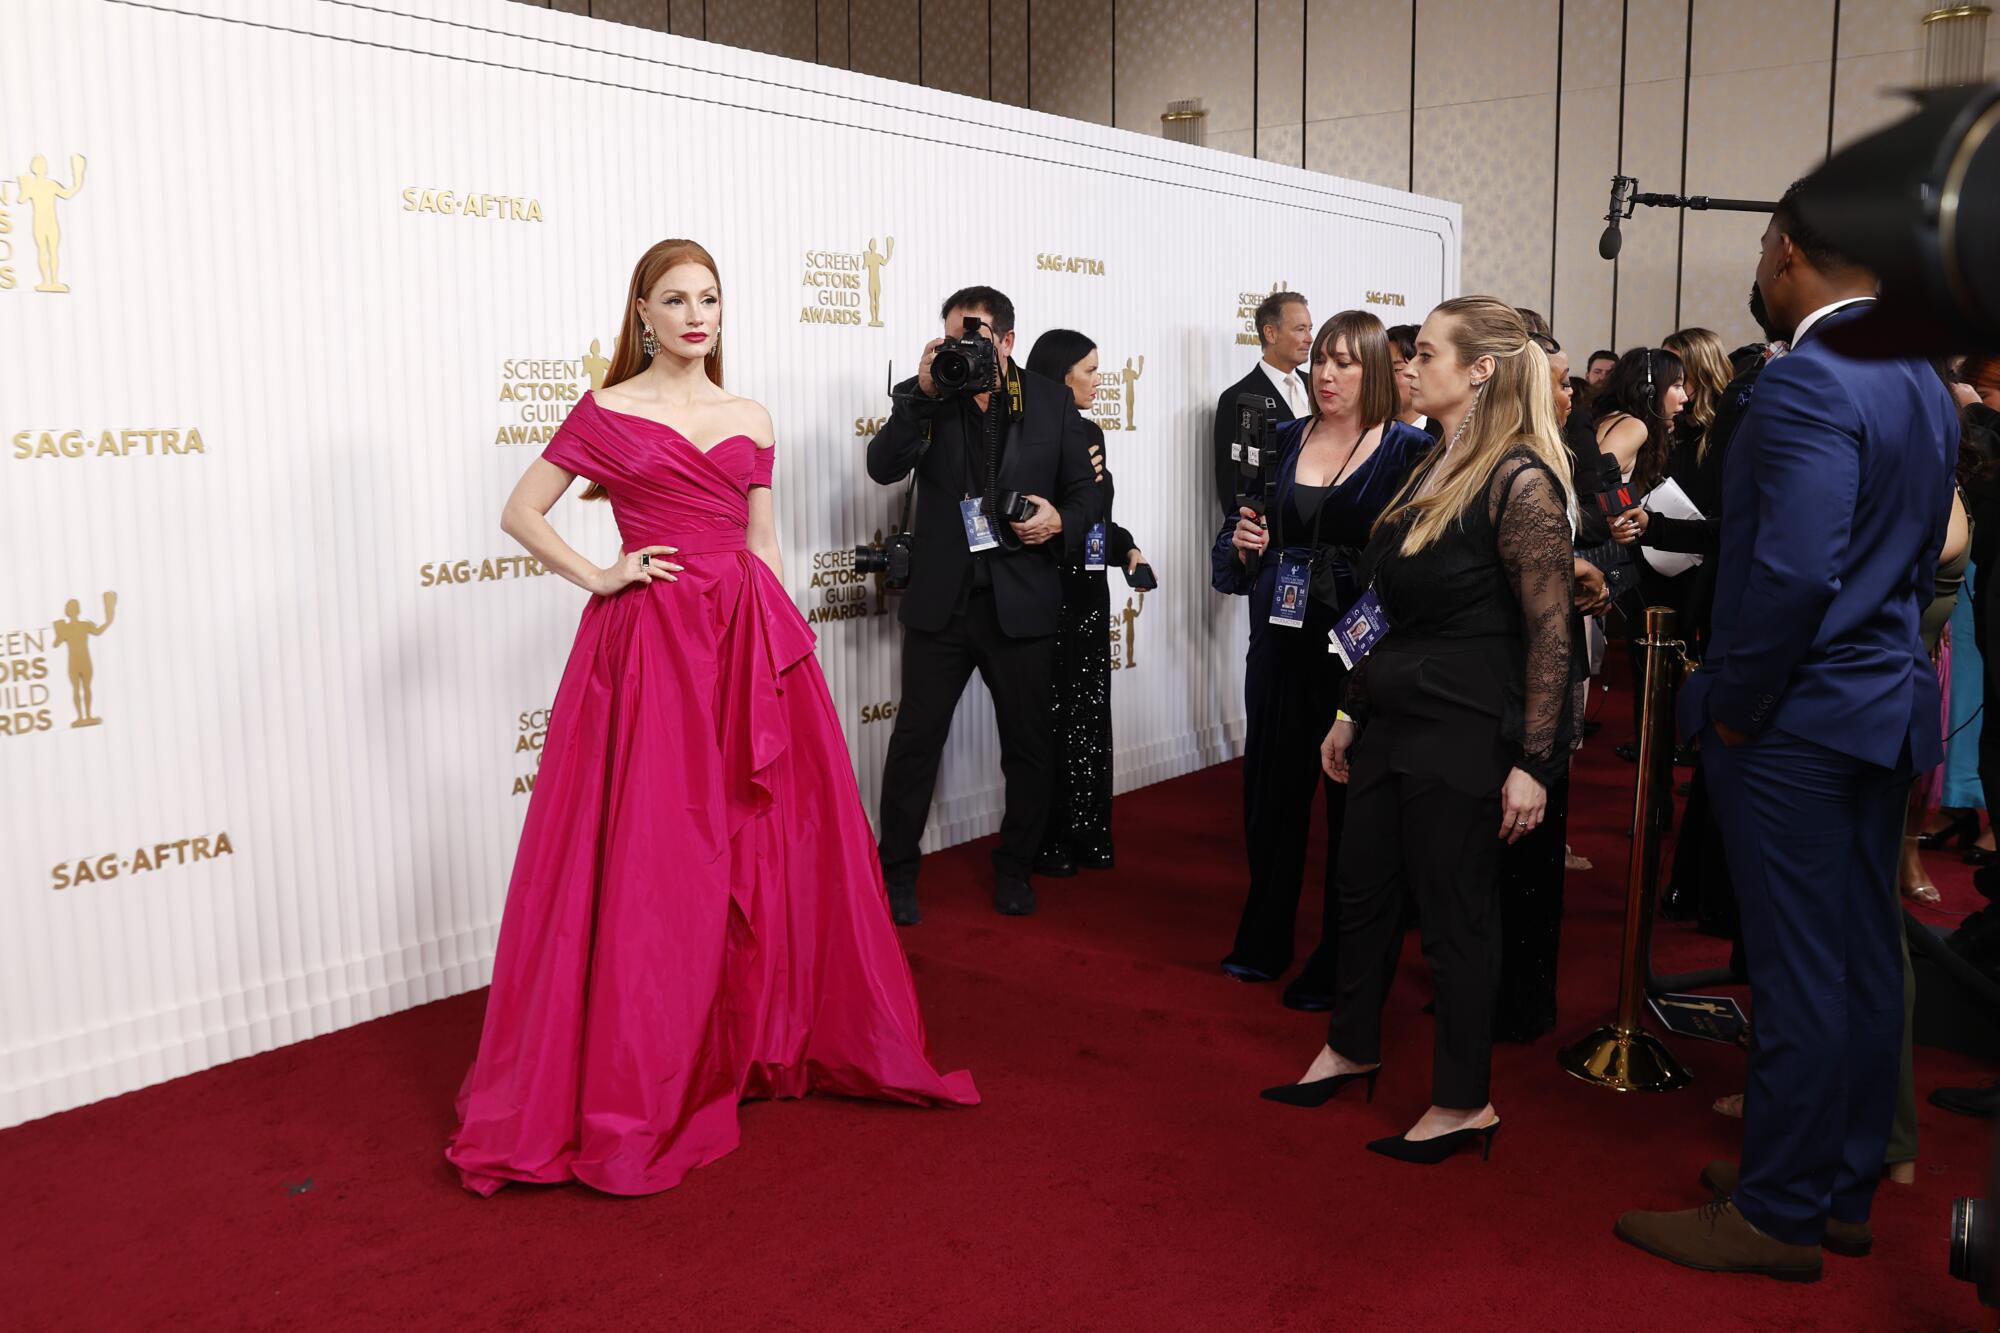 Jessica Chastain arrives at the Screen Actors Guild Awards in Los Angeles on Sunday.